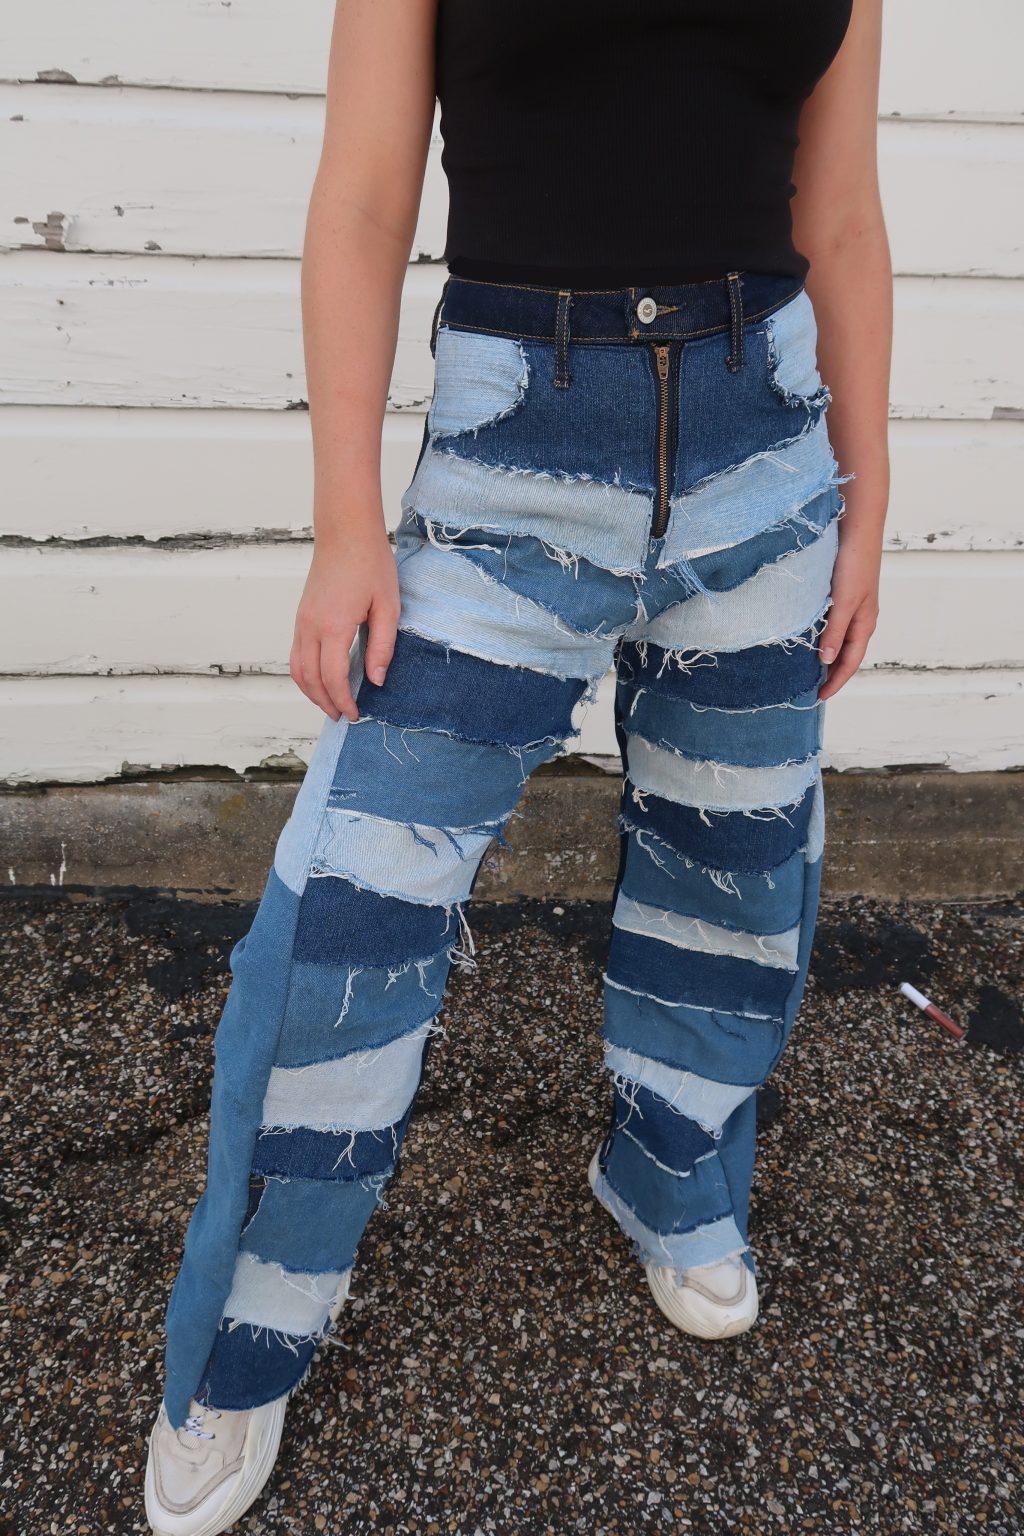 Mentzer upcycles clothes she finds at thrift stores, such as these jeans from fall 2020 in Dallas. She cut, stitched and sewed her way to creating a piece with many layers of different denim. Photo courtesy of Myers Mentzer